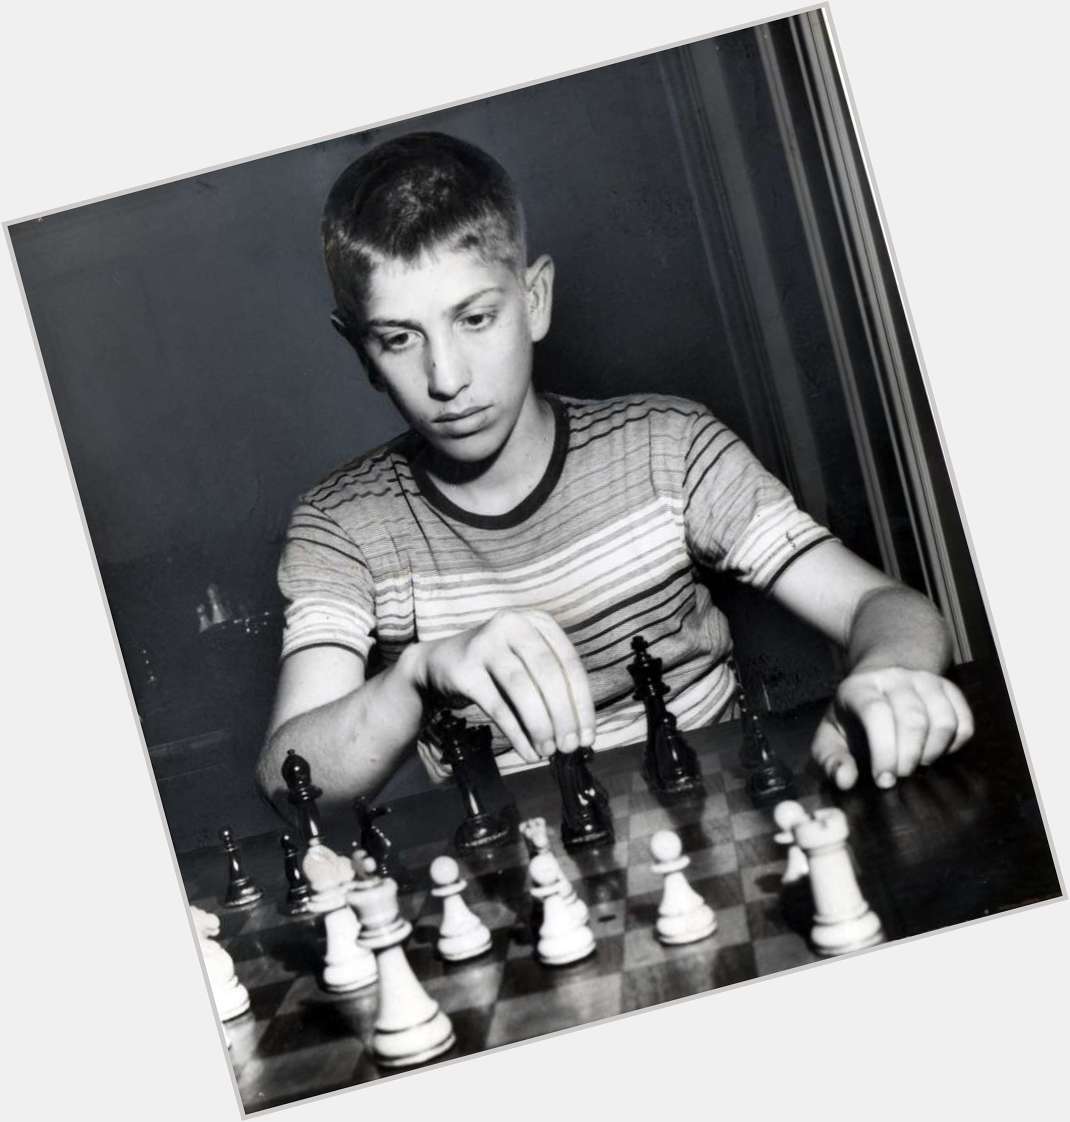 Happy Birthday to Bobby Fischer who grew up near Union and Franklin streets in Brooklyn.  